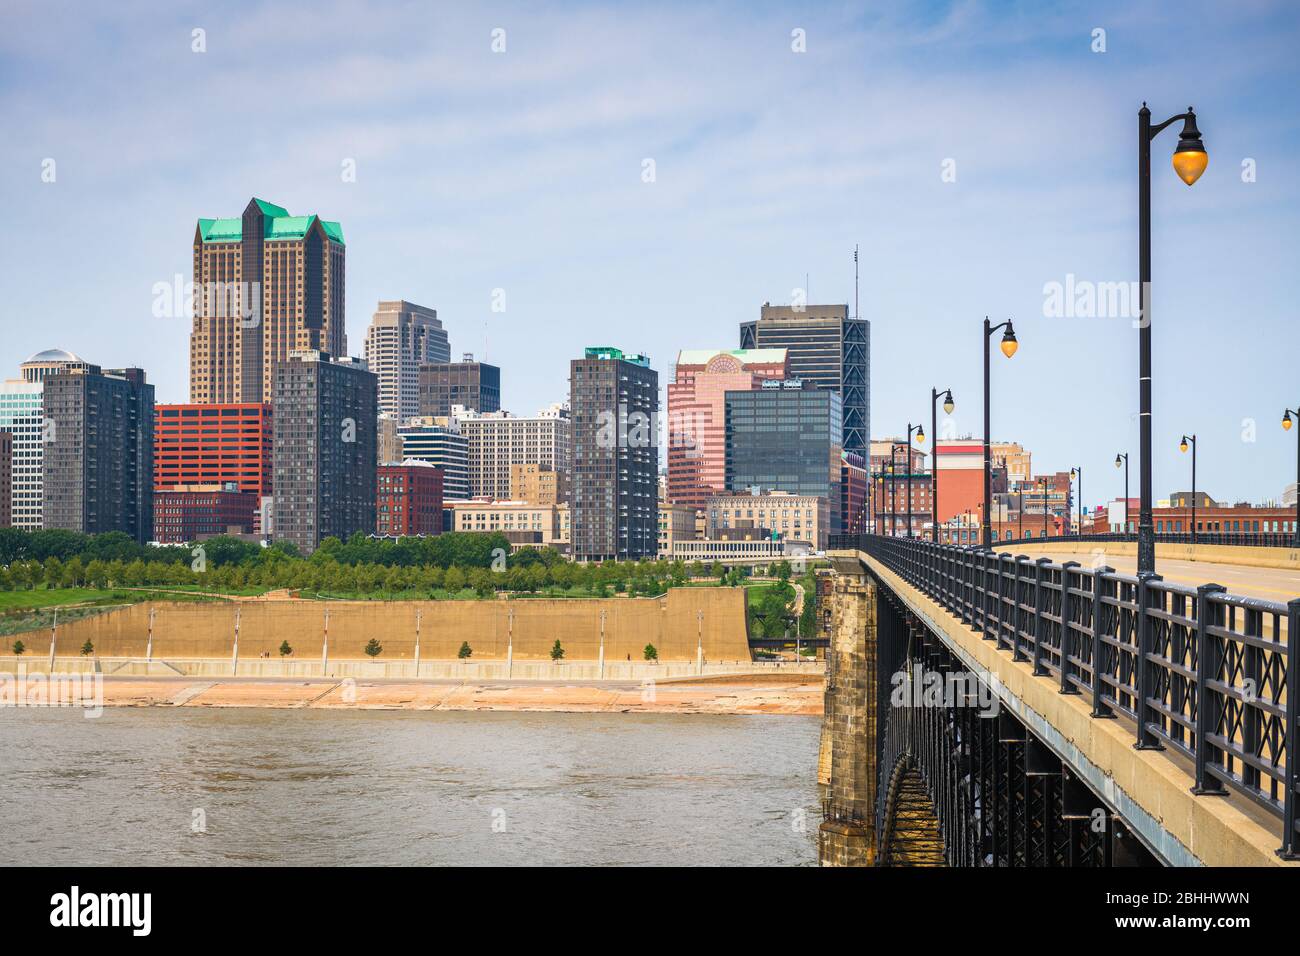 St. Louis, Missouri, USA downtown city skyline on the Mississippi River. Stock Photo